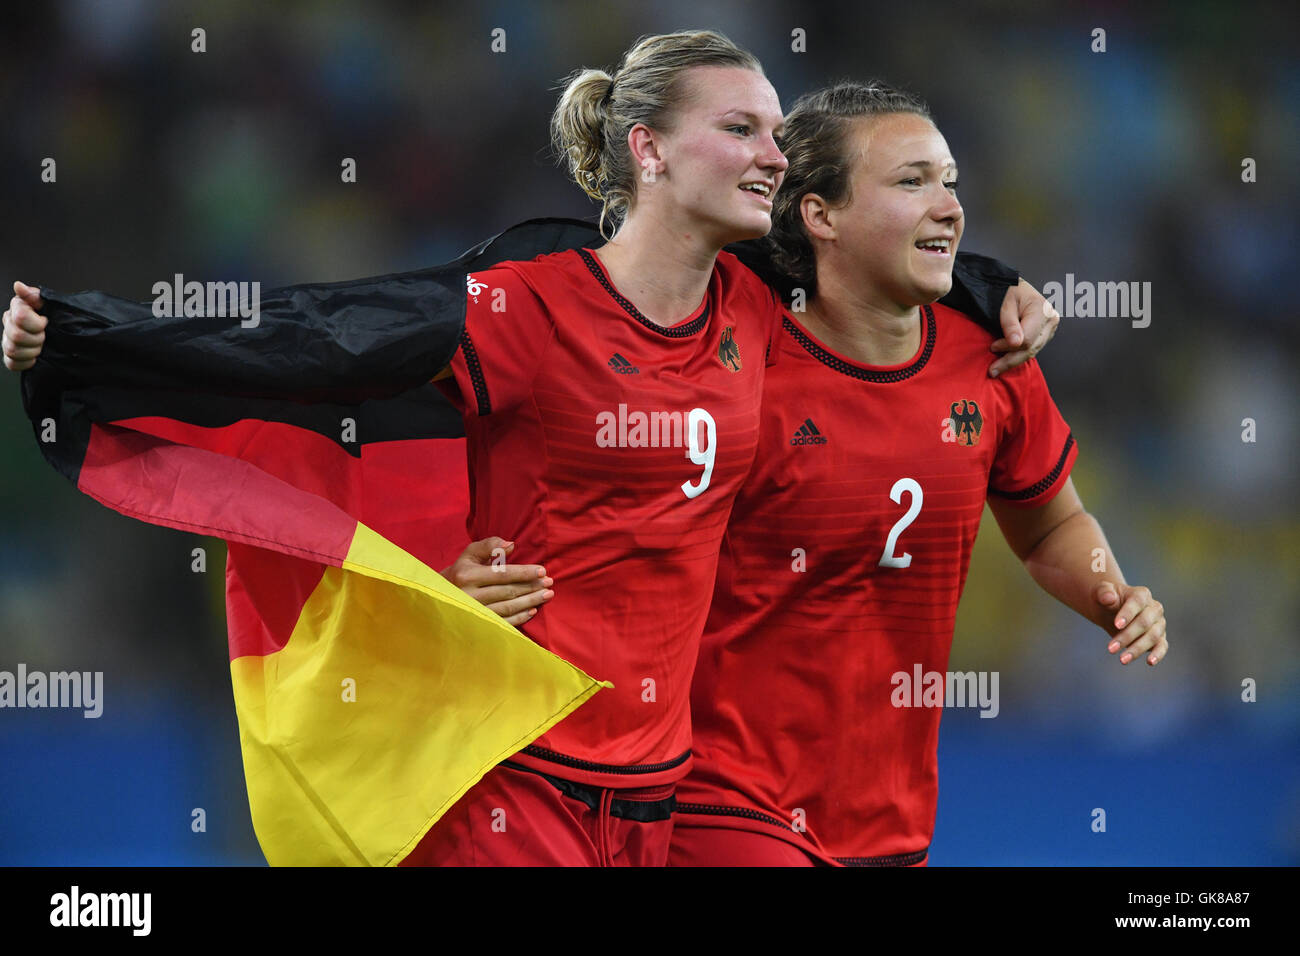 Rio de Janeiro, Brazil. 19th Aug, 2016. Alexandra Popp (L) and Josephine Henning of Germany celebrate after winning the Women's soccer Gold Medal Match between Sweden and Germany during the Rio 2016 Olympic Games at the Maracana in Rio de Janeiro, Brazil, 19 August 2016. Photo: Soeren Stache/dpa/Alamy Live News Stock Photo